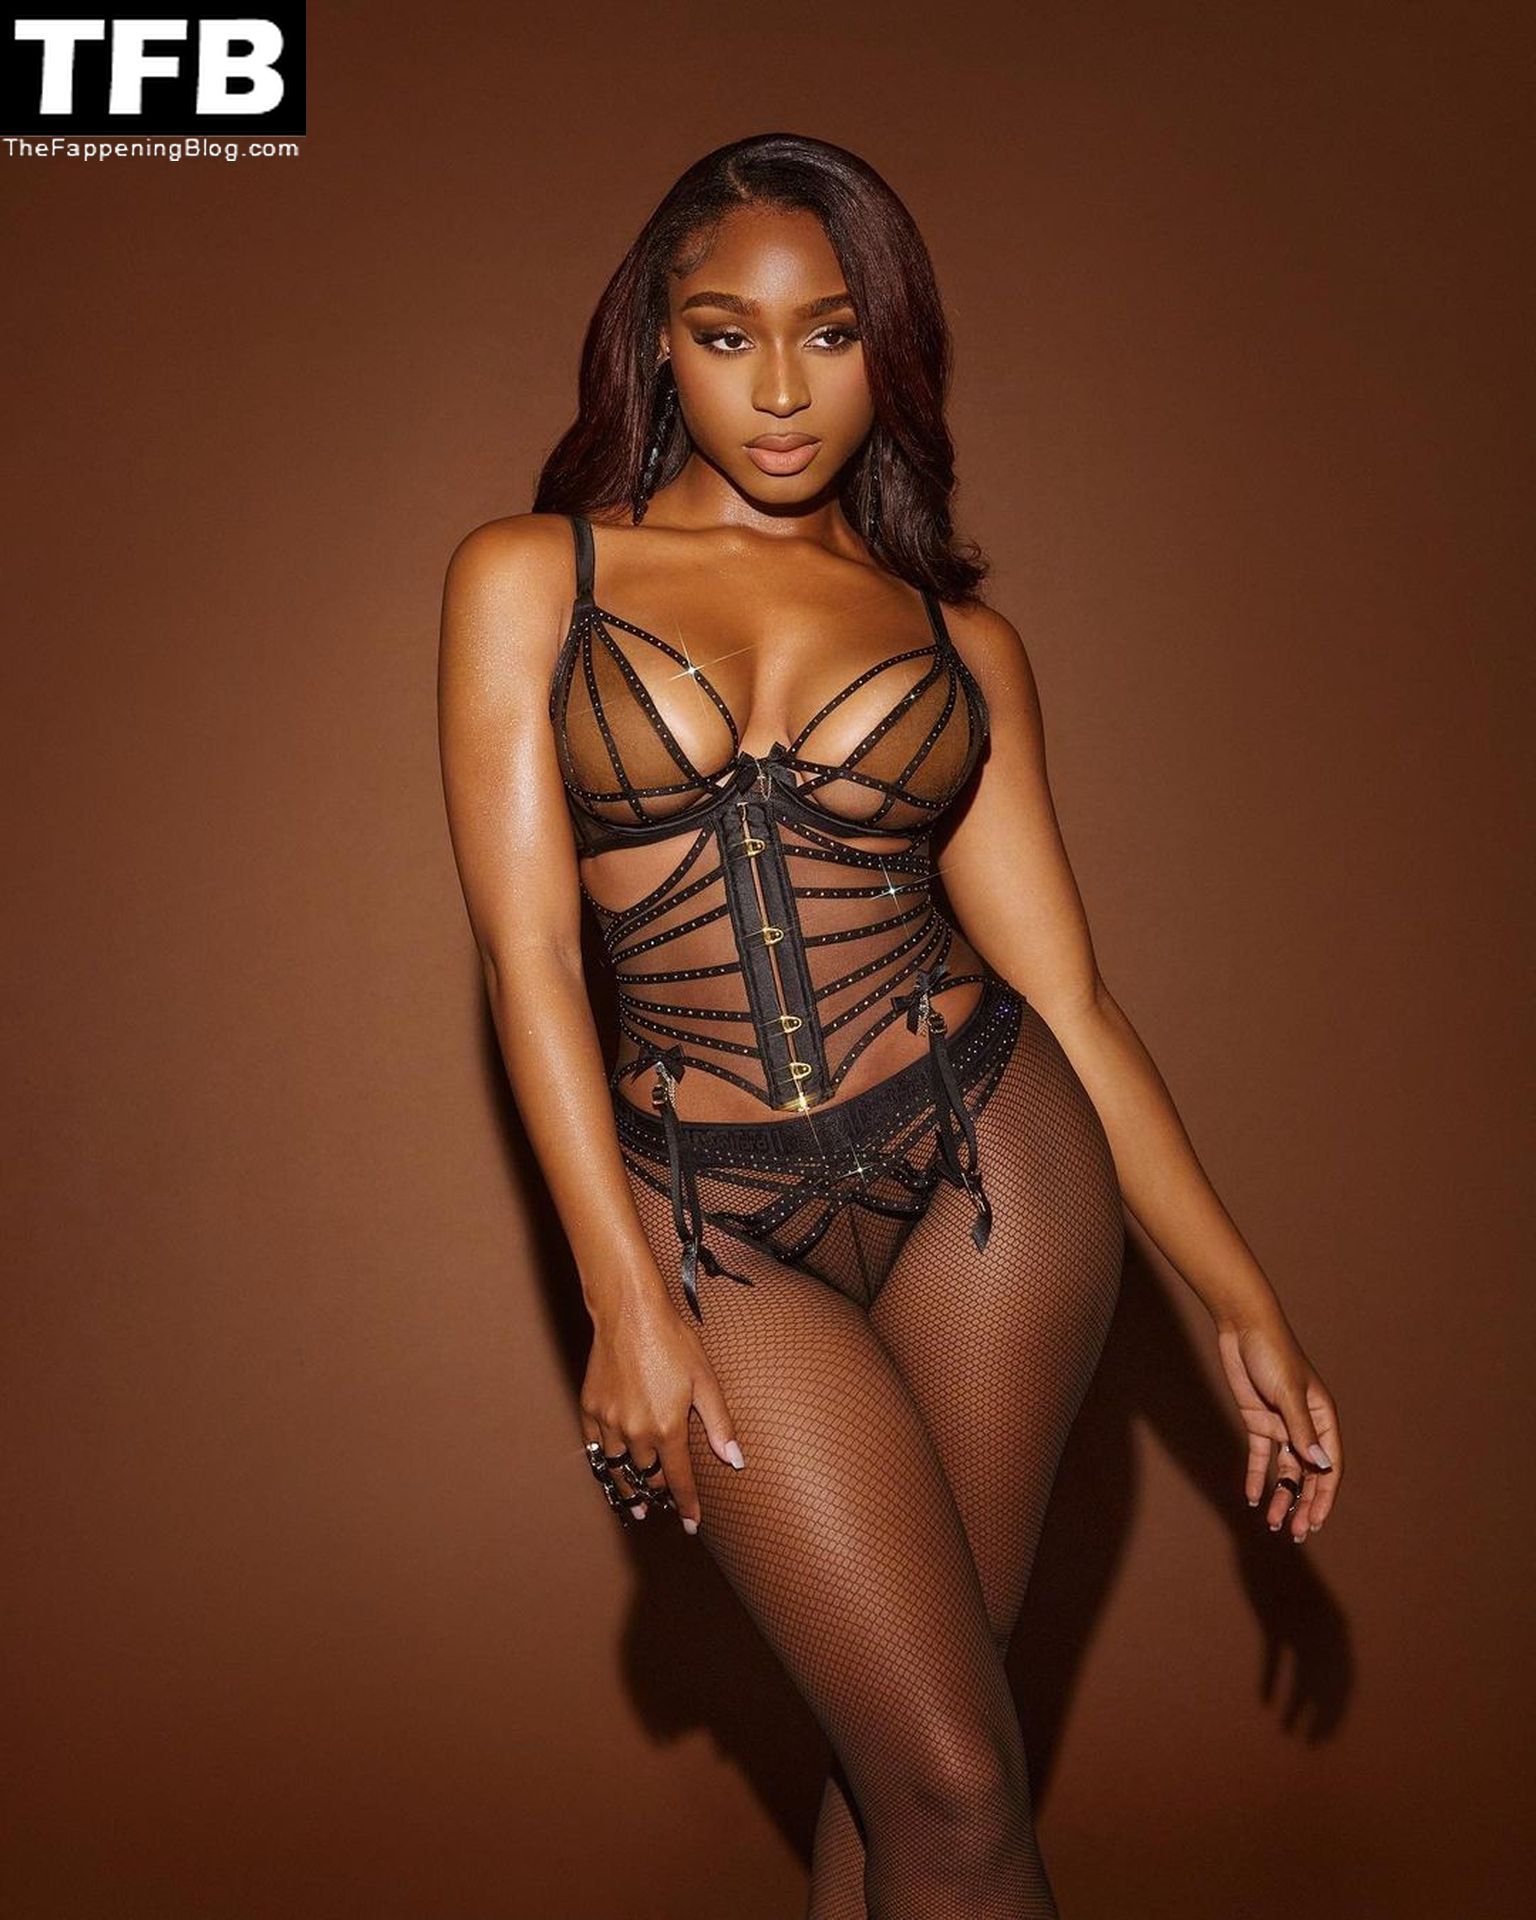 Normani Kordei Sexy Lingerie 2 thefappeningblog.com  - Normani Poses in Lingerie (7 Photos)